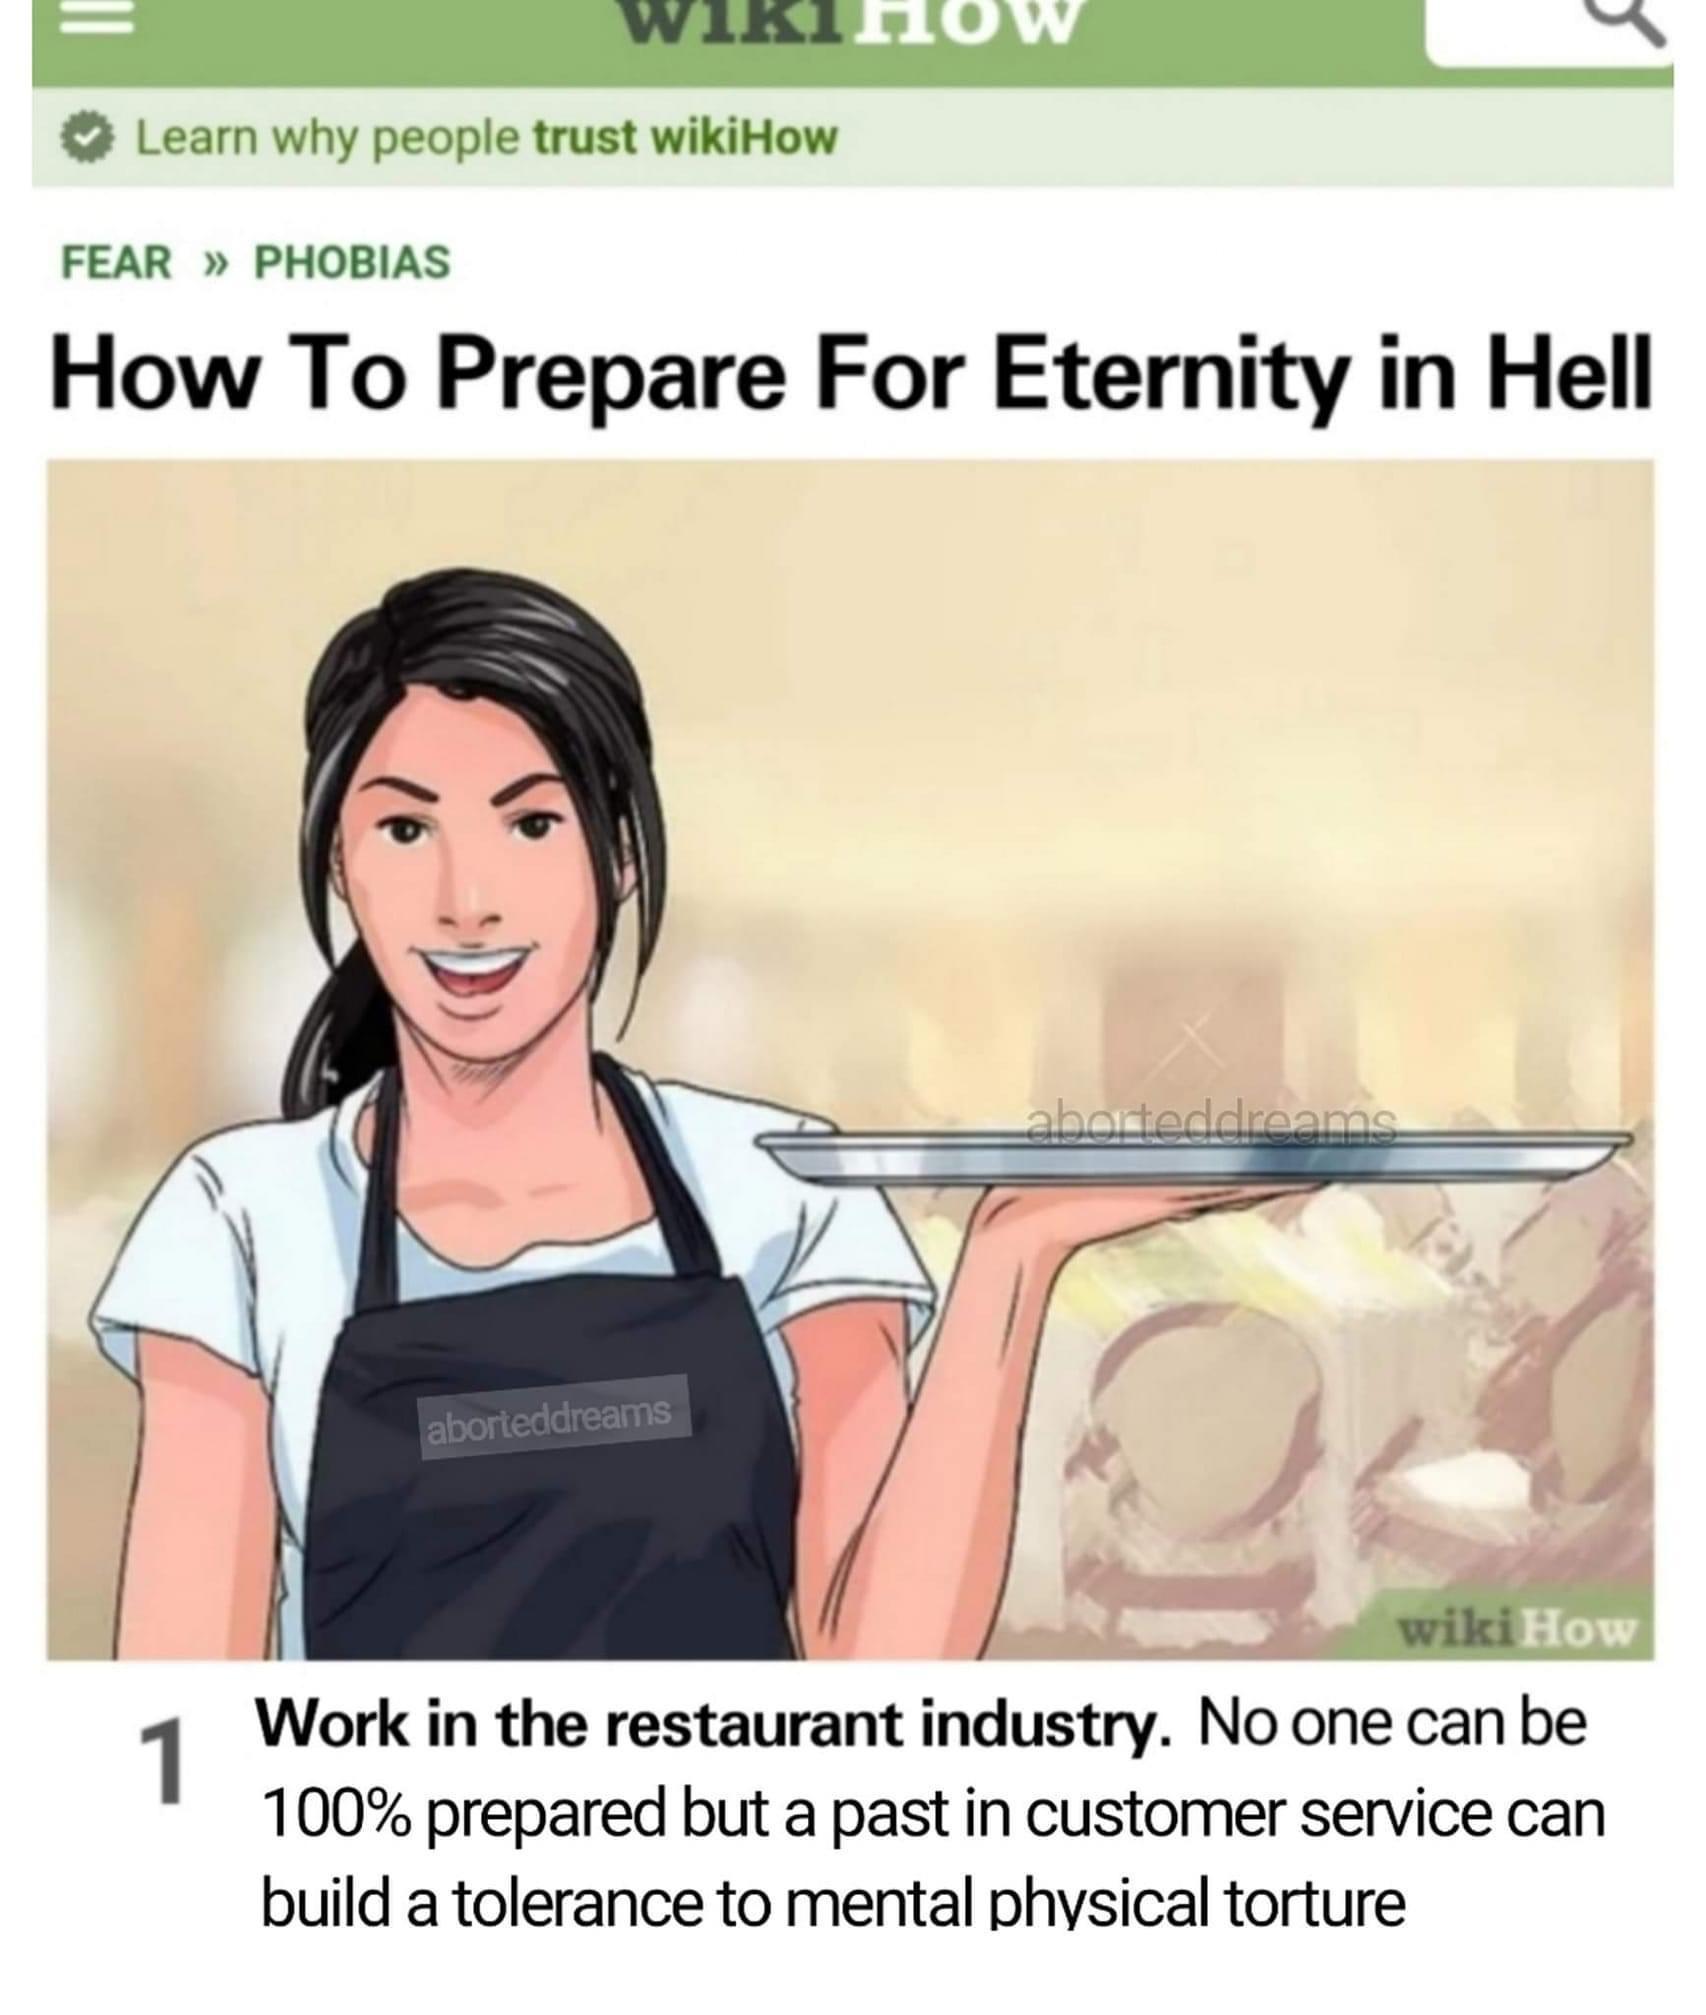 Restaurant industry - Wiki Ow Learn why people trust wikiHow Fear >> Phobias How To Prepare For Eternity in Hell aborteddreams 5 aborteddreams wiki How 1 Work in the restaurant industry. No one can be 100% prepared but a past in customer service can build